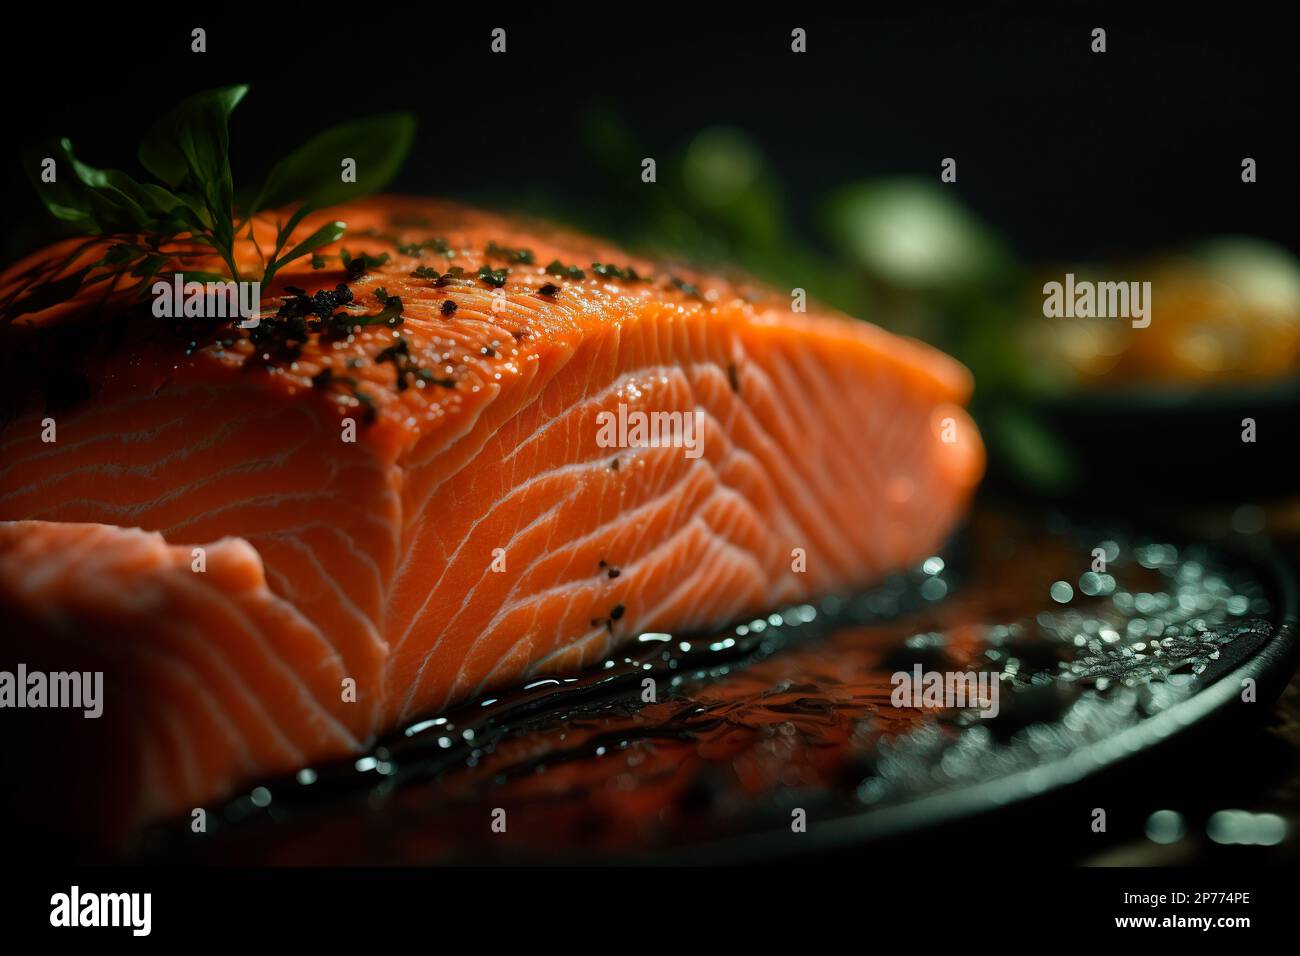 Very appetizing and delicious cooked salmon tail on a dark plate. Grilling recipes. Close-up photo of food Stock Photo